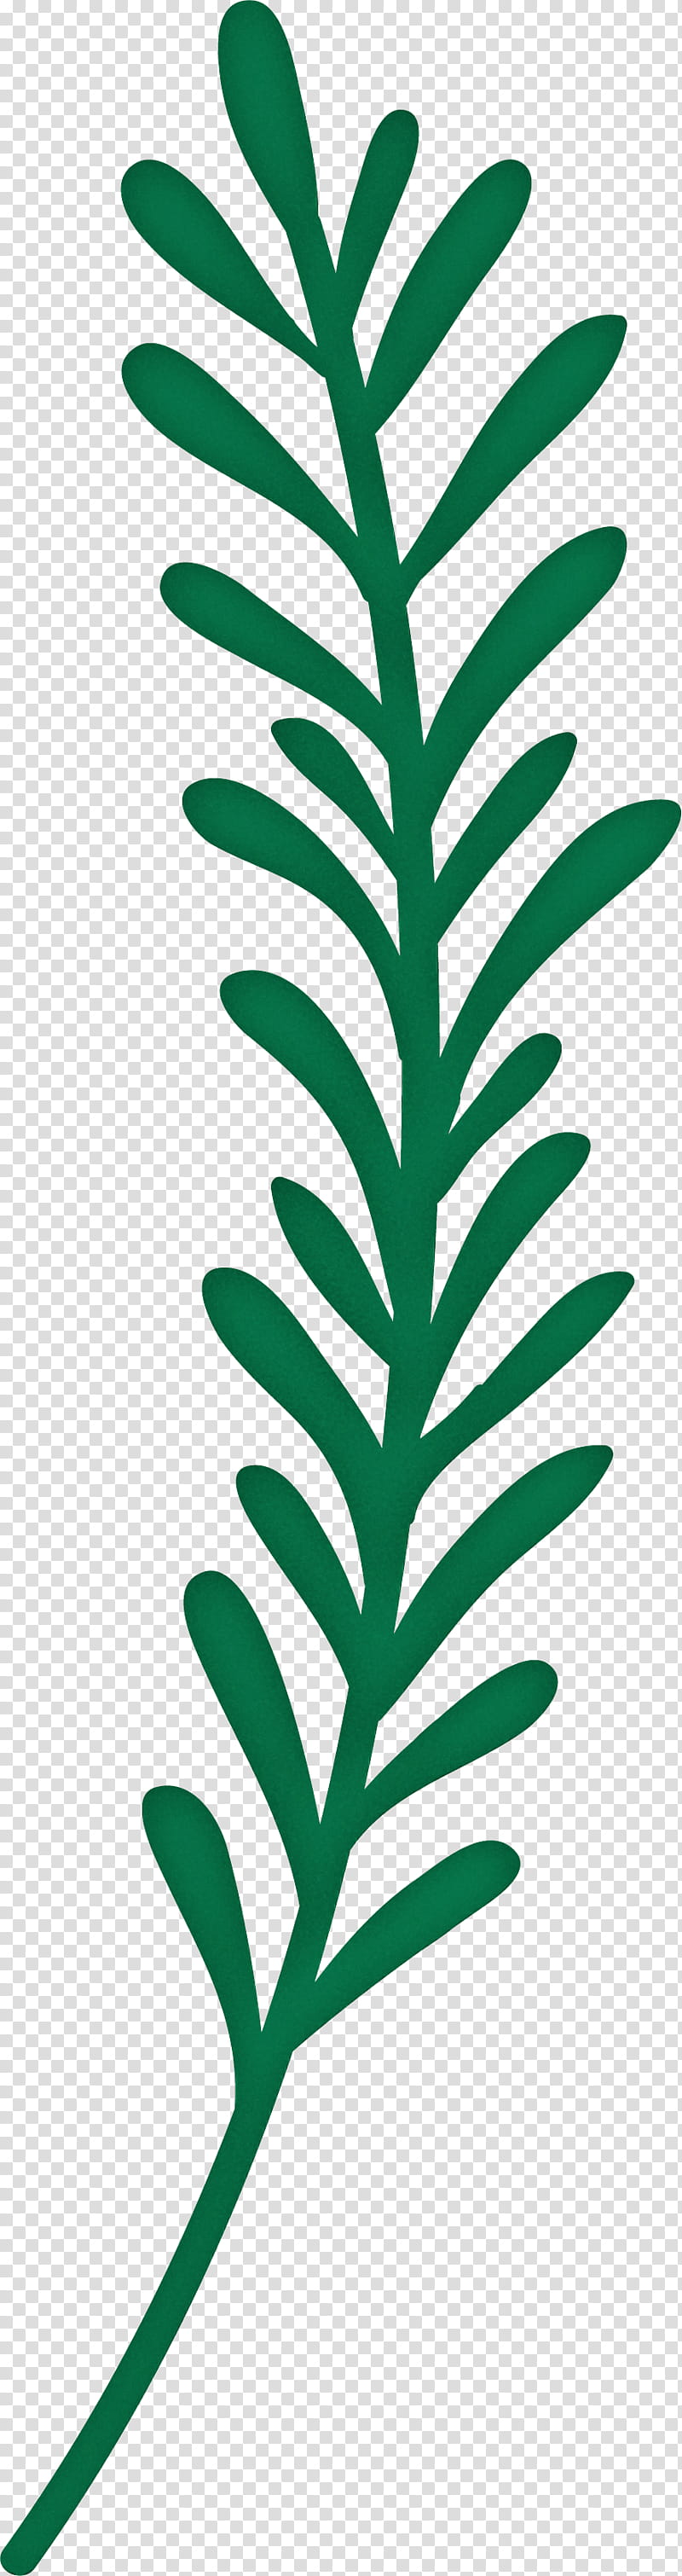 Leaf, synthesis, Plant Stem, synthetic Pigment, Pillow, Softball Pillow Cushion, Biological Pigment, Transpiration transparent background PNG clipart